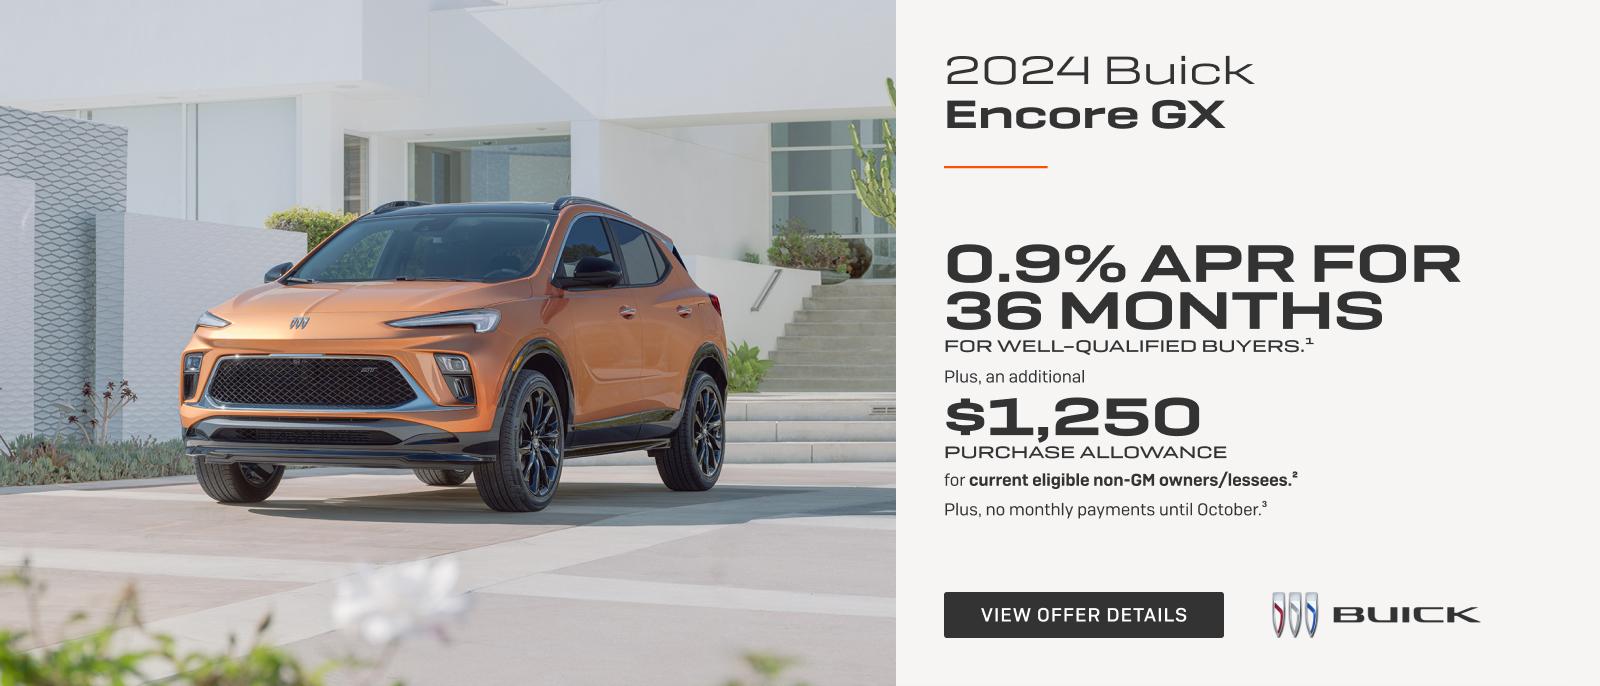 0.9% APR FOR 36 MONTHS 
FOR WELL-QUALIFIED BUYERS.1

Plus, an additional $1,250 PURCHASE ALLOWANCE for current eligible non-GM owners/lessees.2

Plus, no monthly payments until October. 3